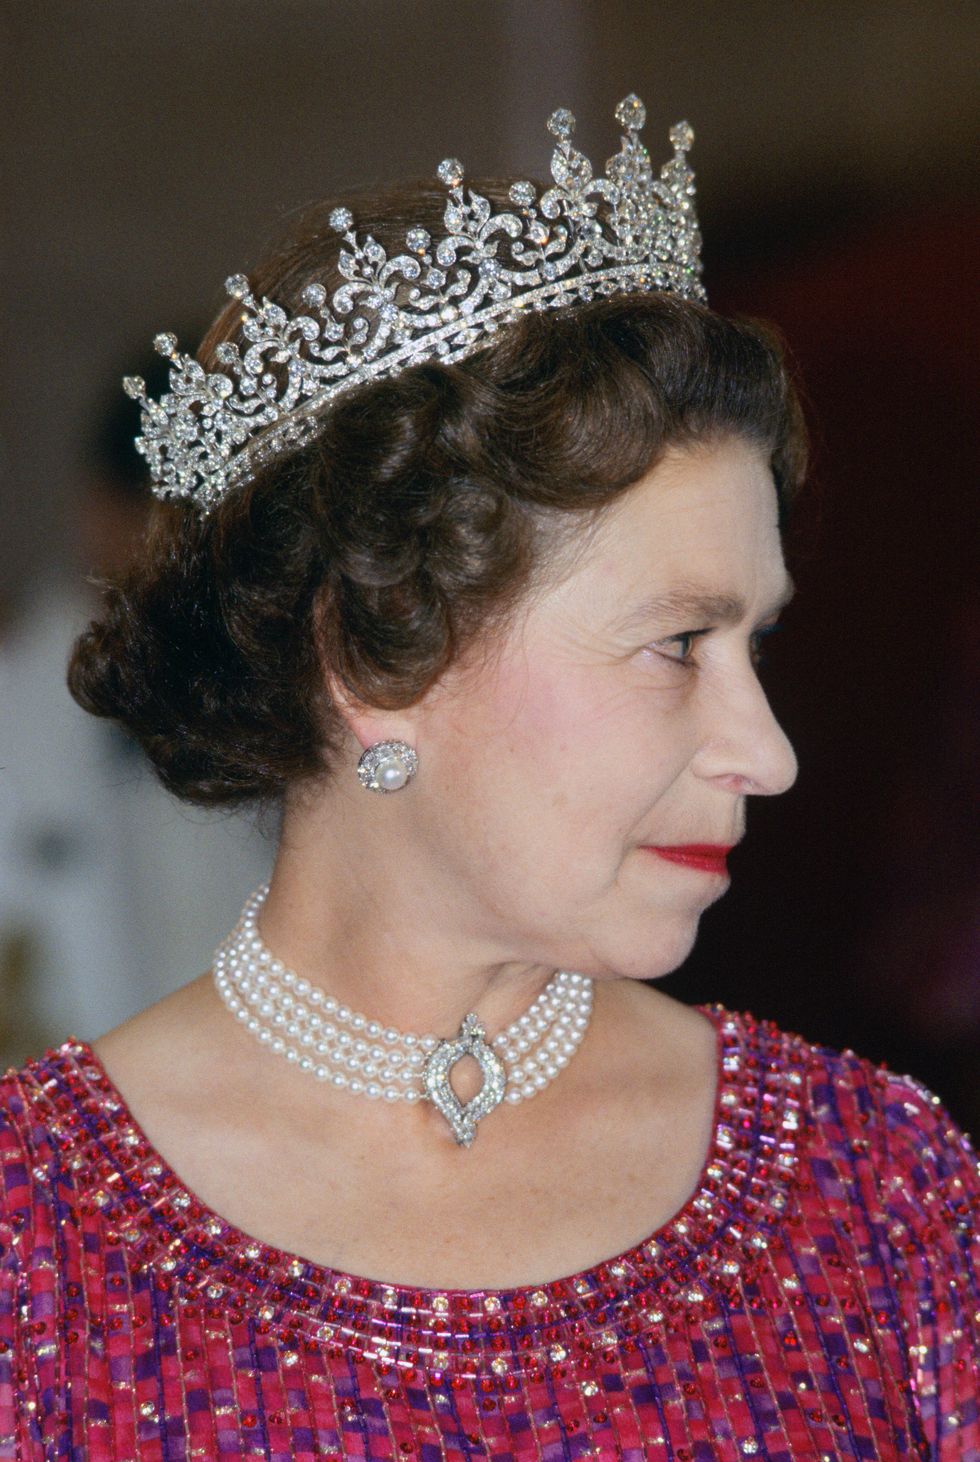 Queen wearing a diamond necklace